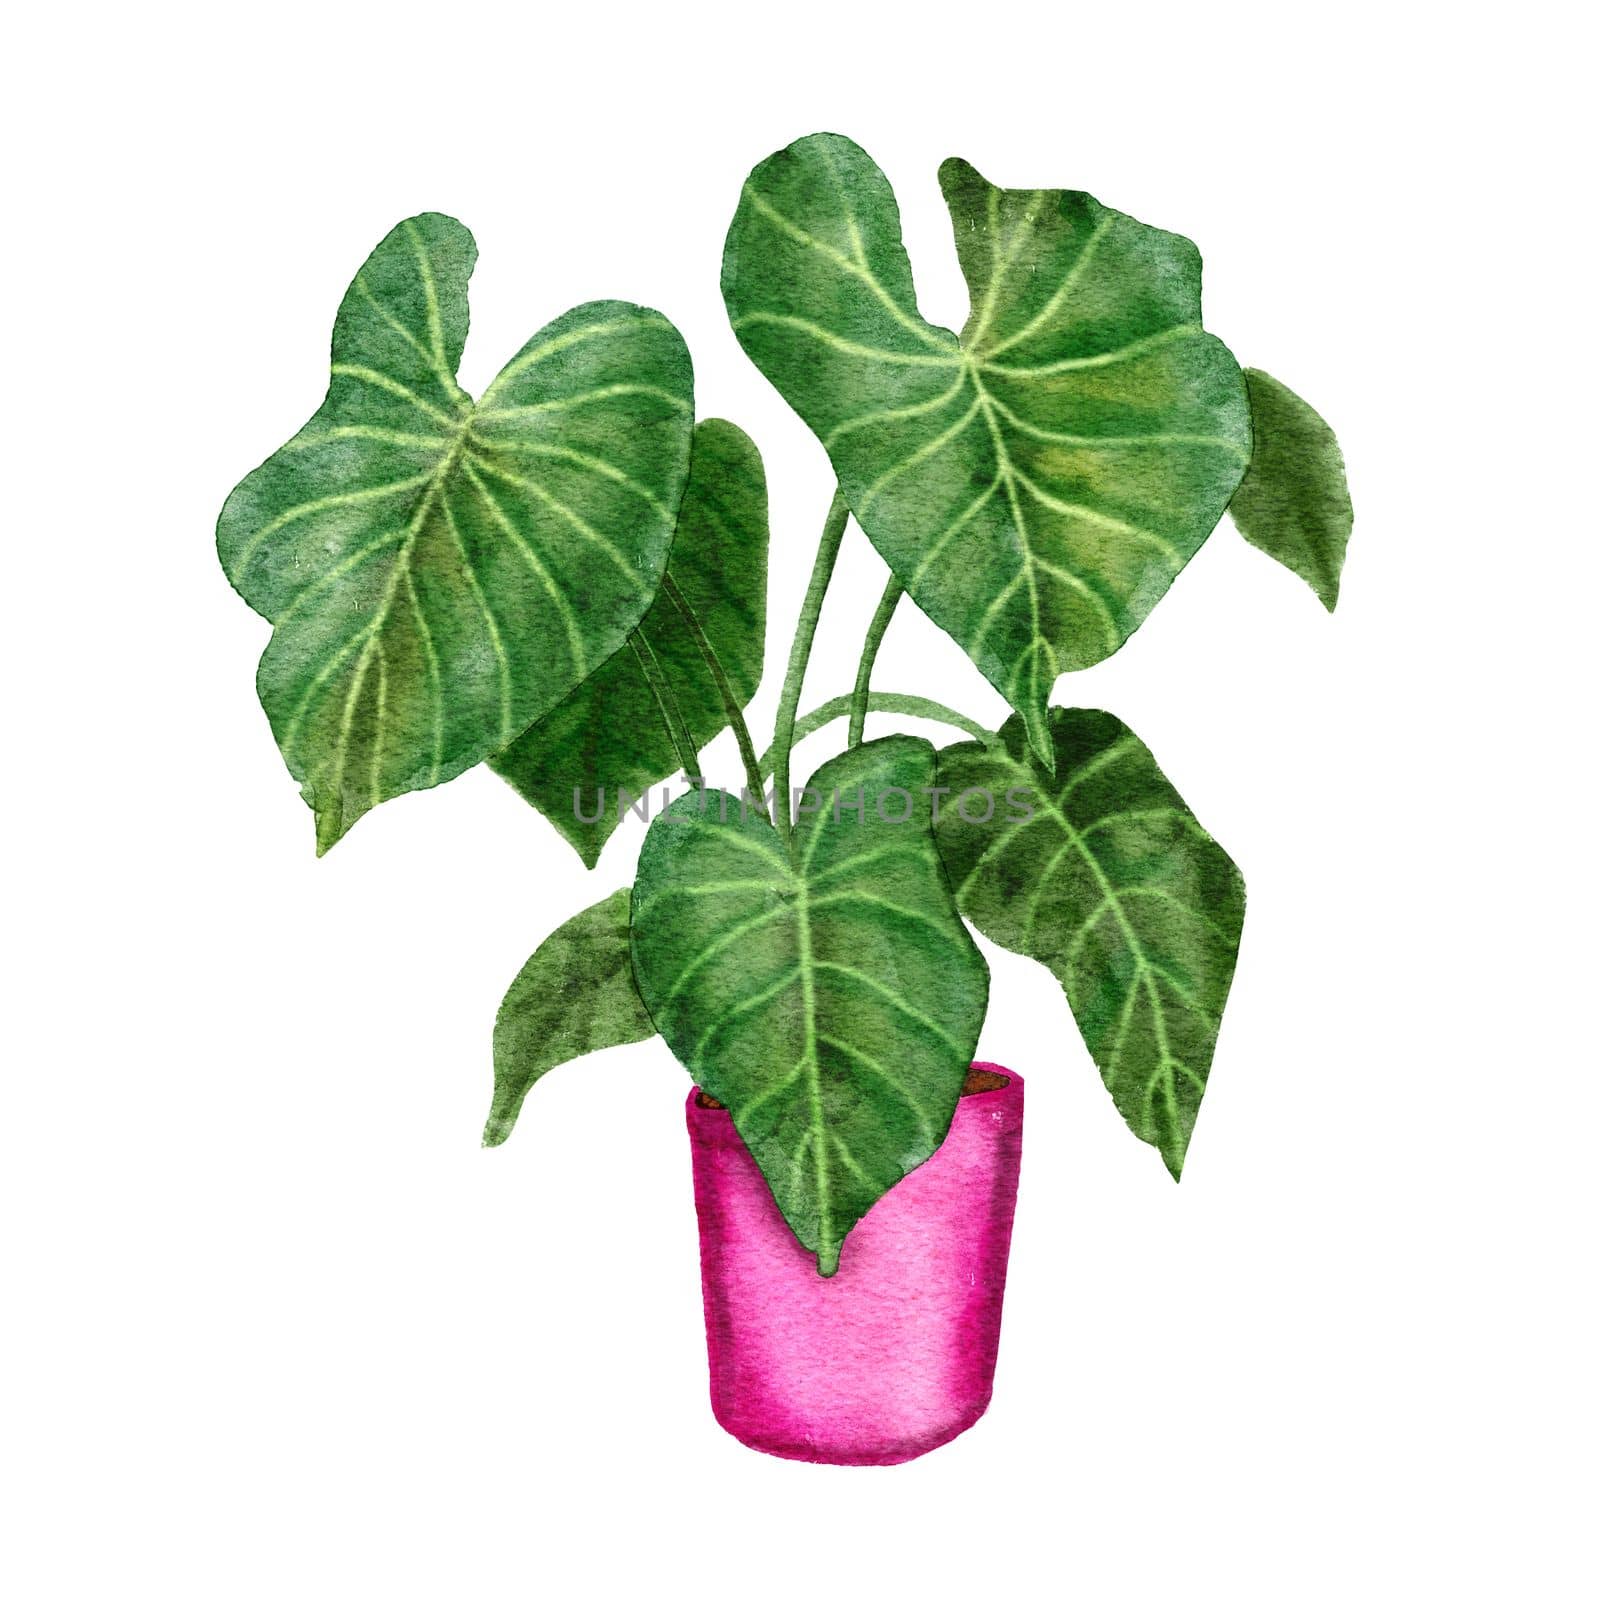 Hand drawn watercolor illustration of philodendron gloriosim houseplant, green leaves pink pot plant flower, tropical foliage leaves, expensive variety. Urban jungle nature lovers species herb. by Lagmar